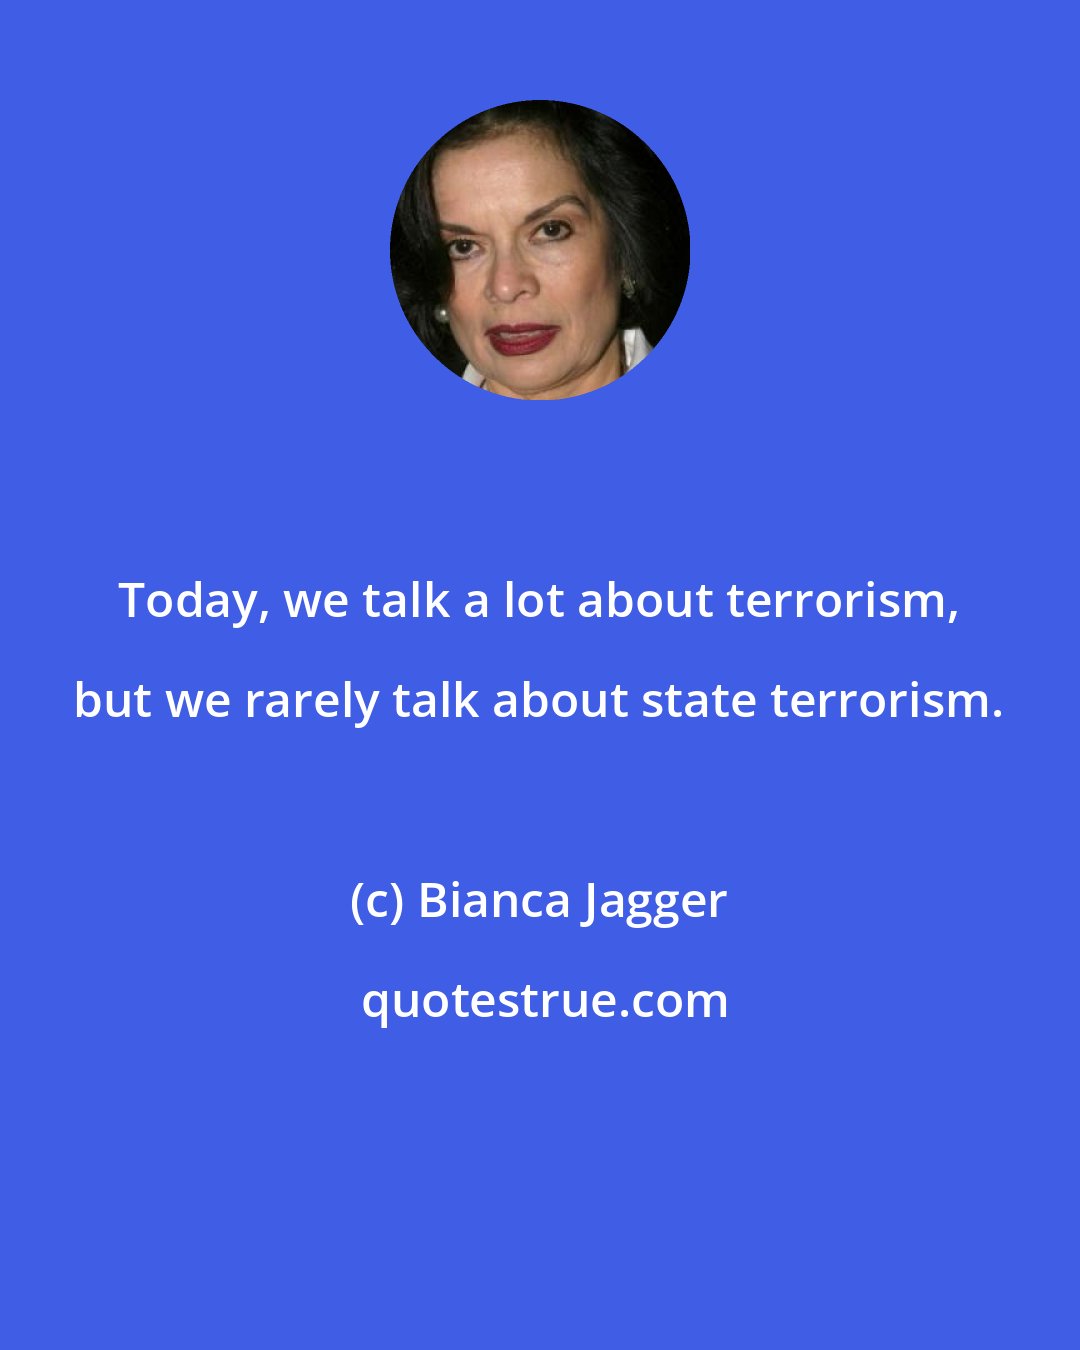 Bianca Jagger: Today, we talk a lot about terrorism, but we rarely talk about state terrorism.